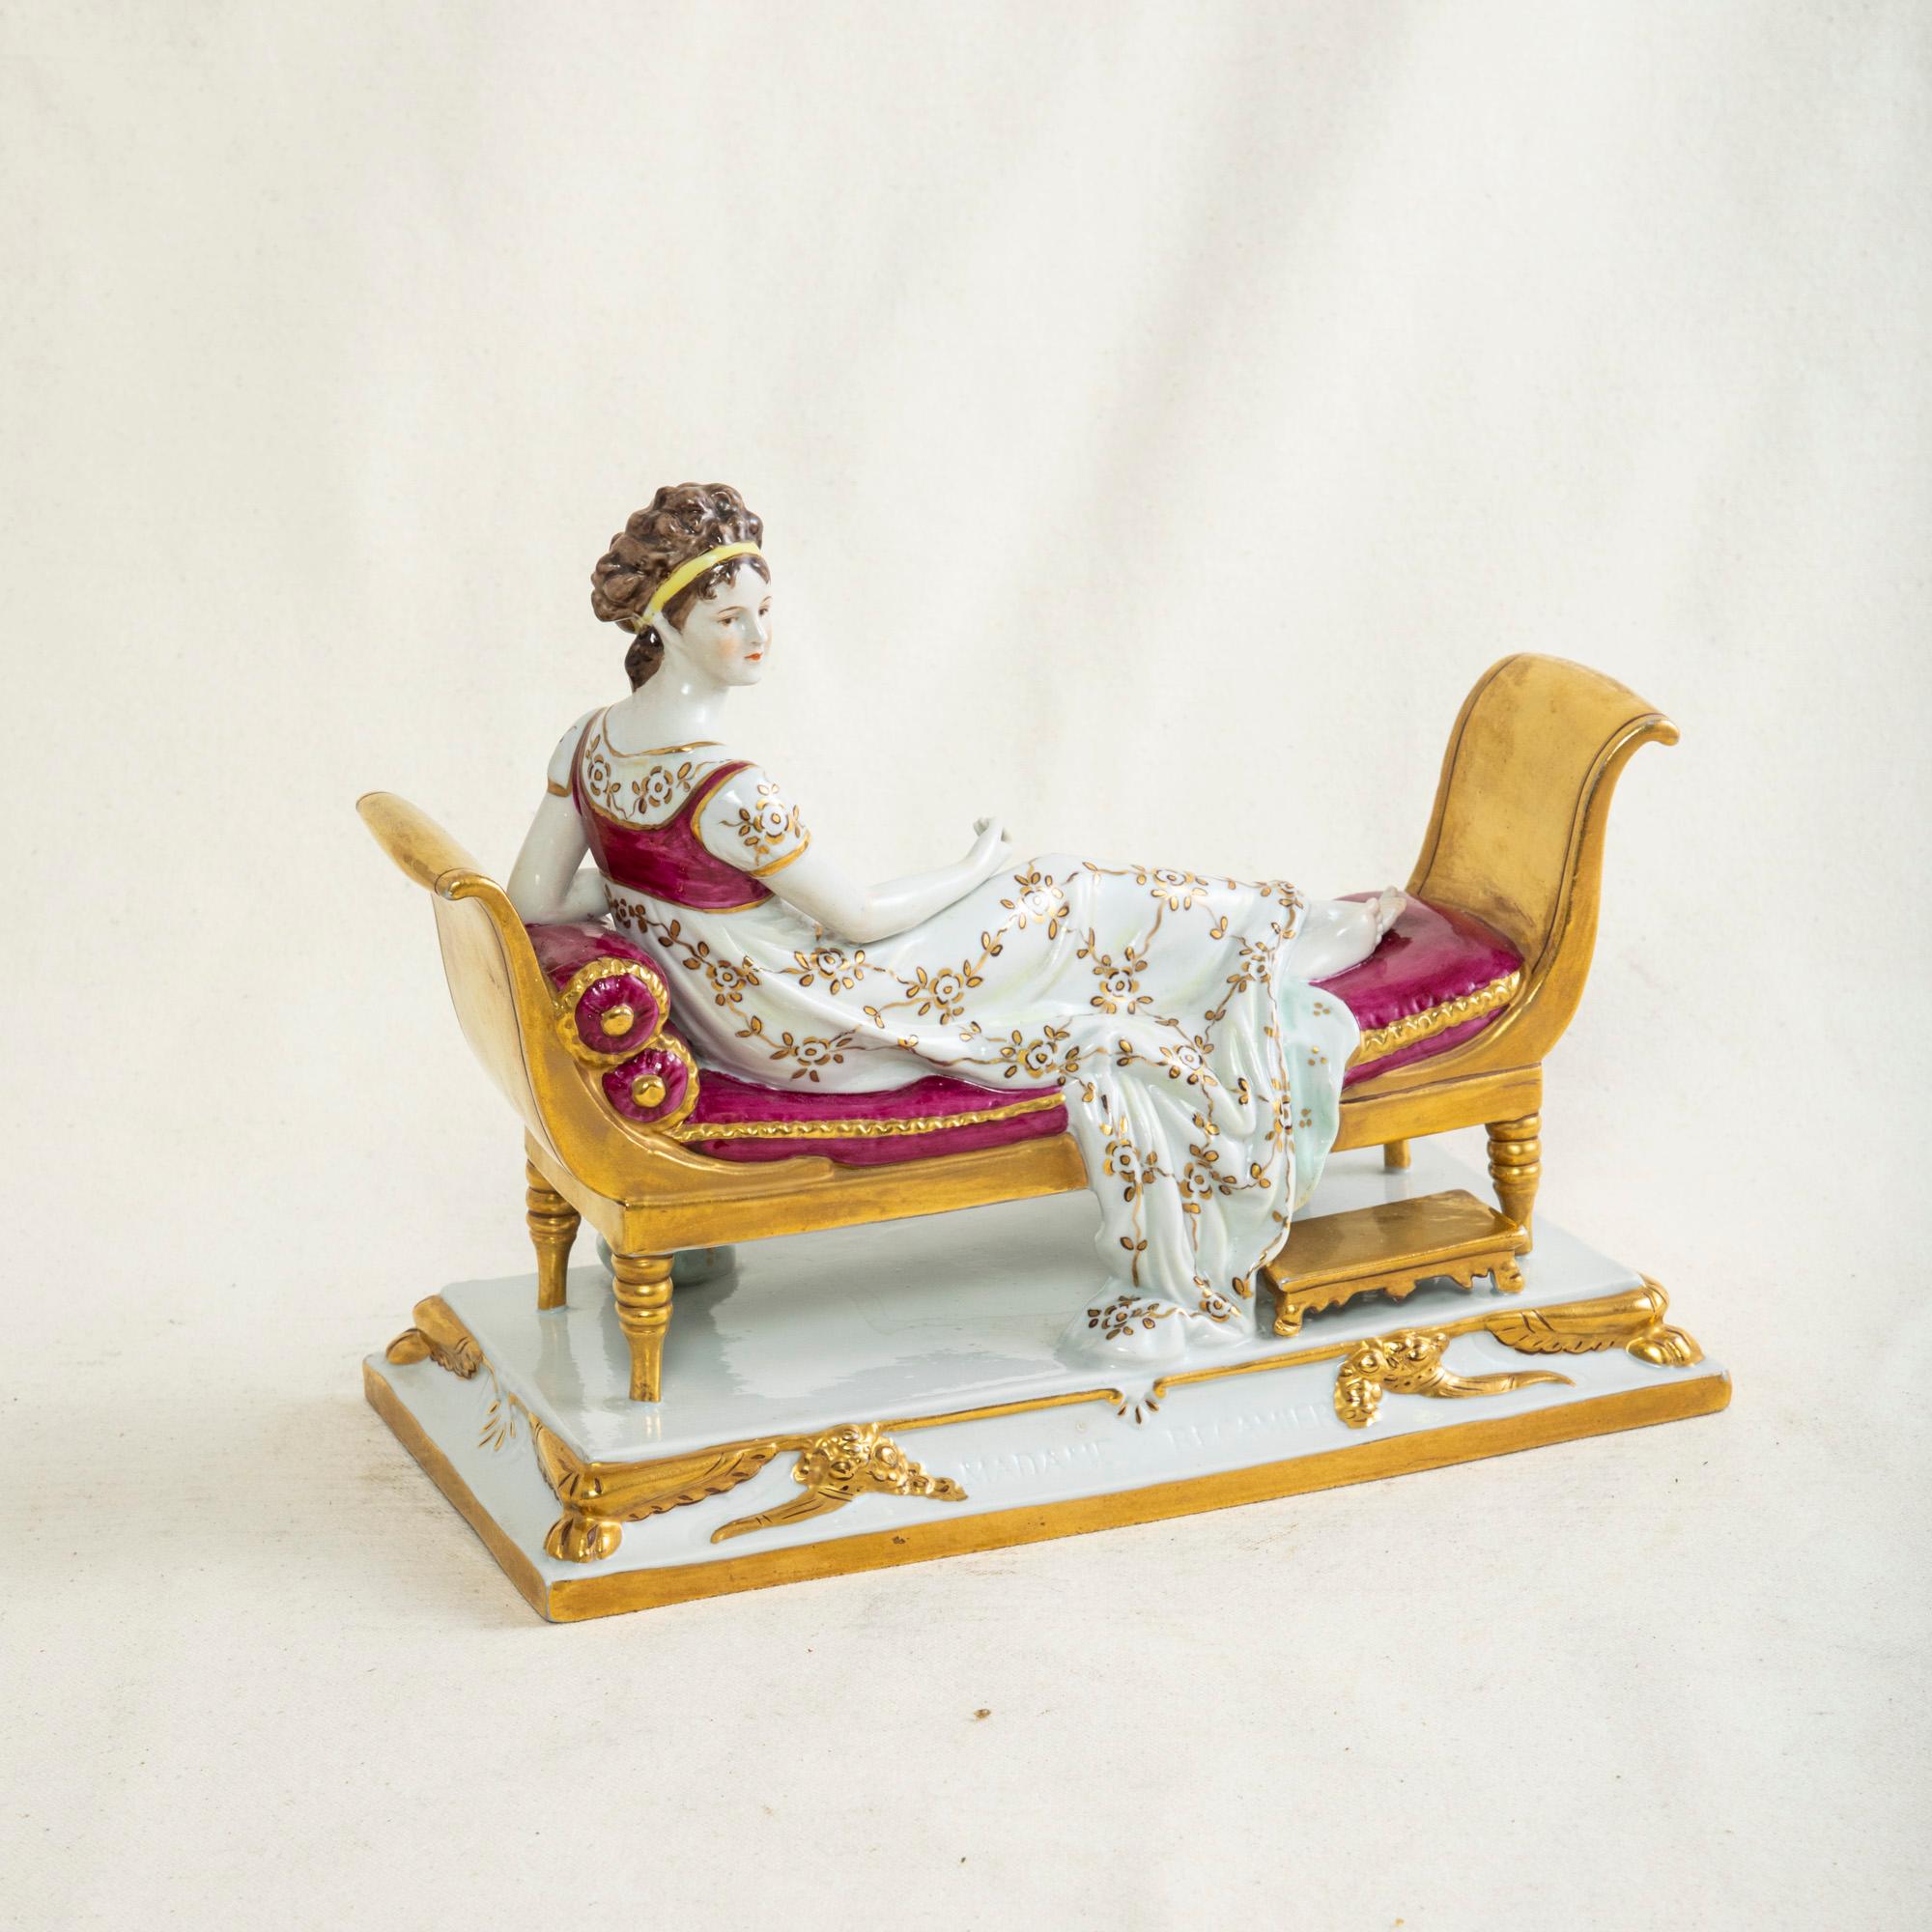 This late nineteenth century French porcelain figurine depicts Madame Recamier in repose on a golden daybed. Juliette Recamier (1777-1849) was a famed socialite in the early nineteenth century, known for her beauty as well as her salons of literary